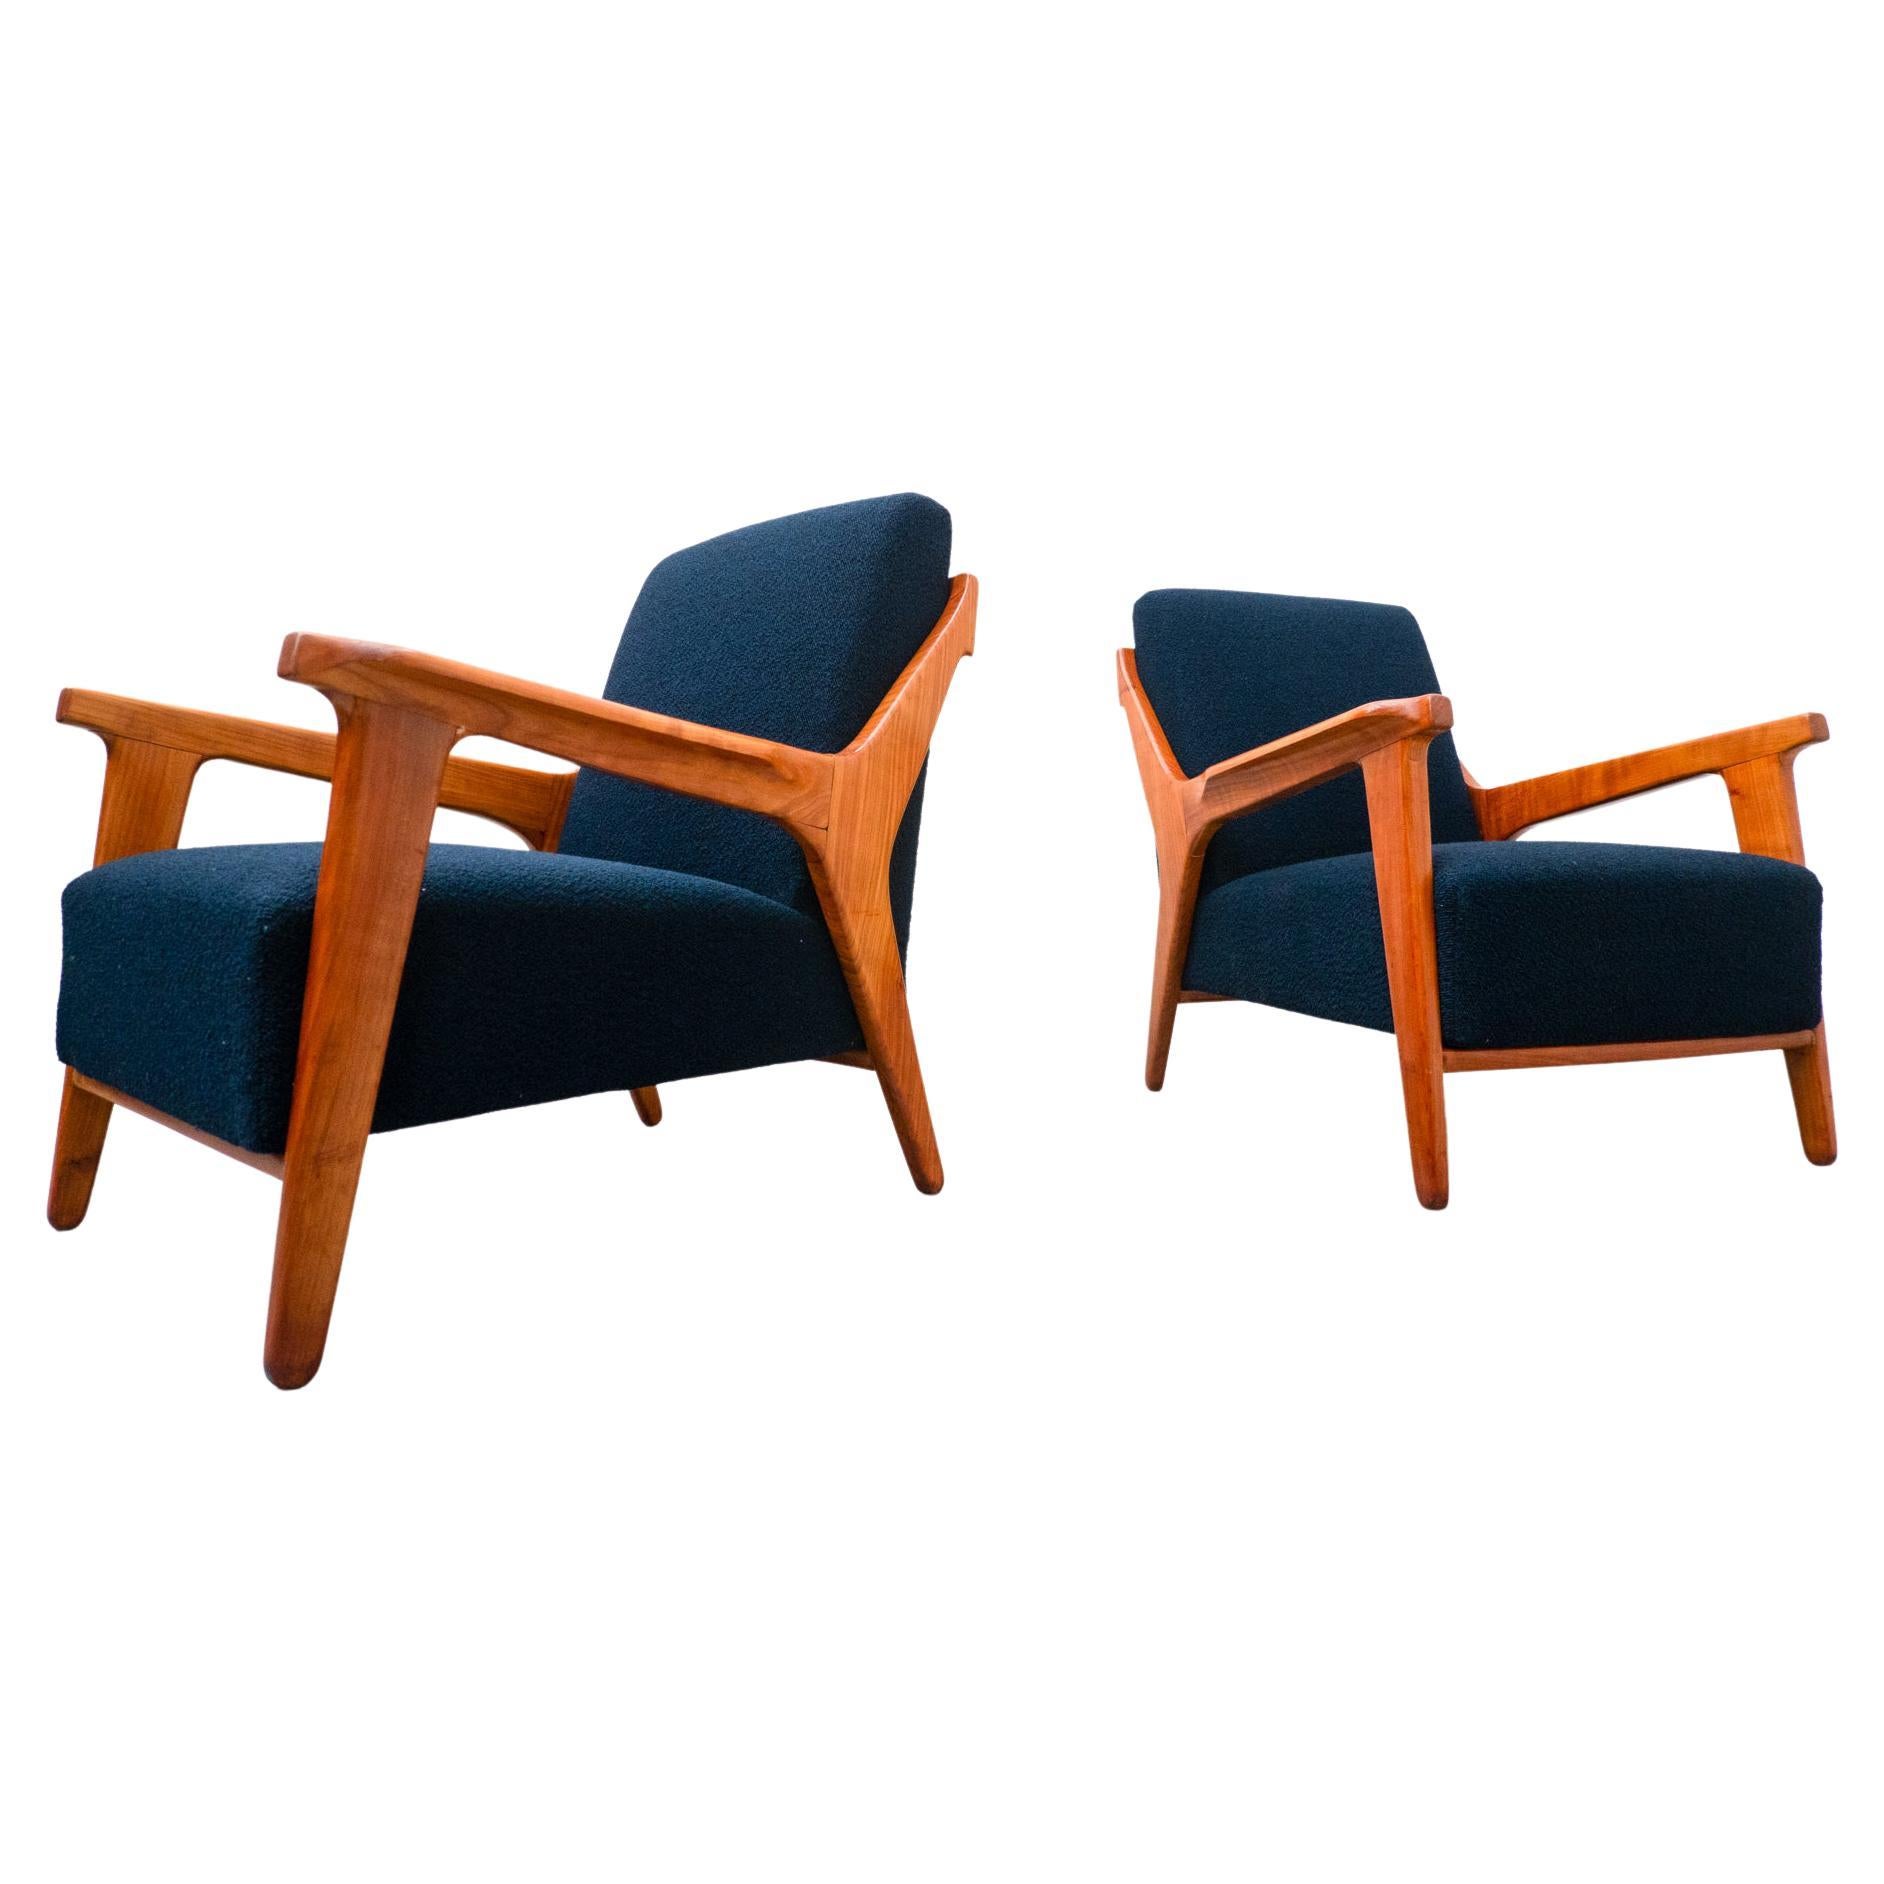 Pair of Blue Armchairs attributed to Melchiorre Bega, Cherry Wood, Italy